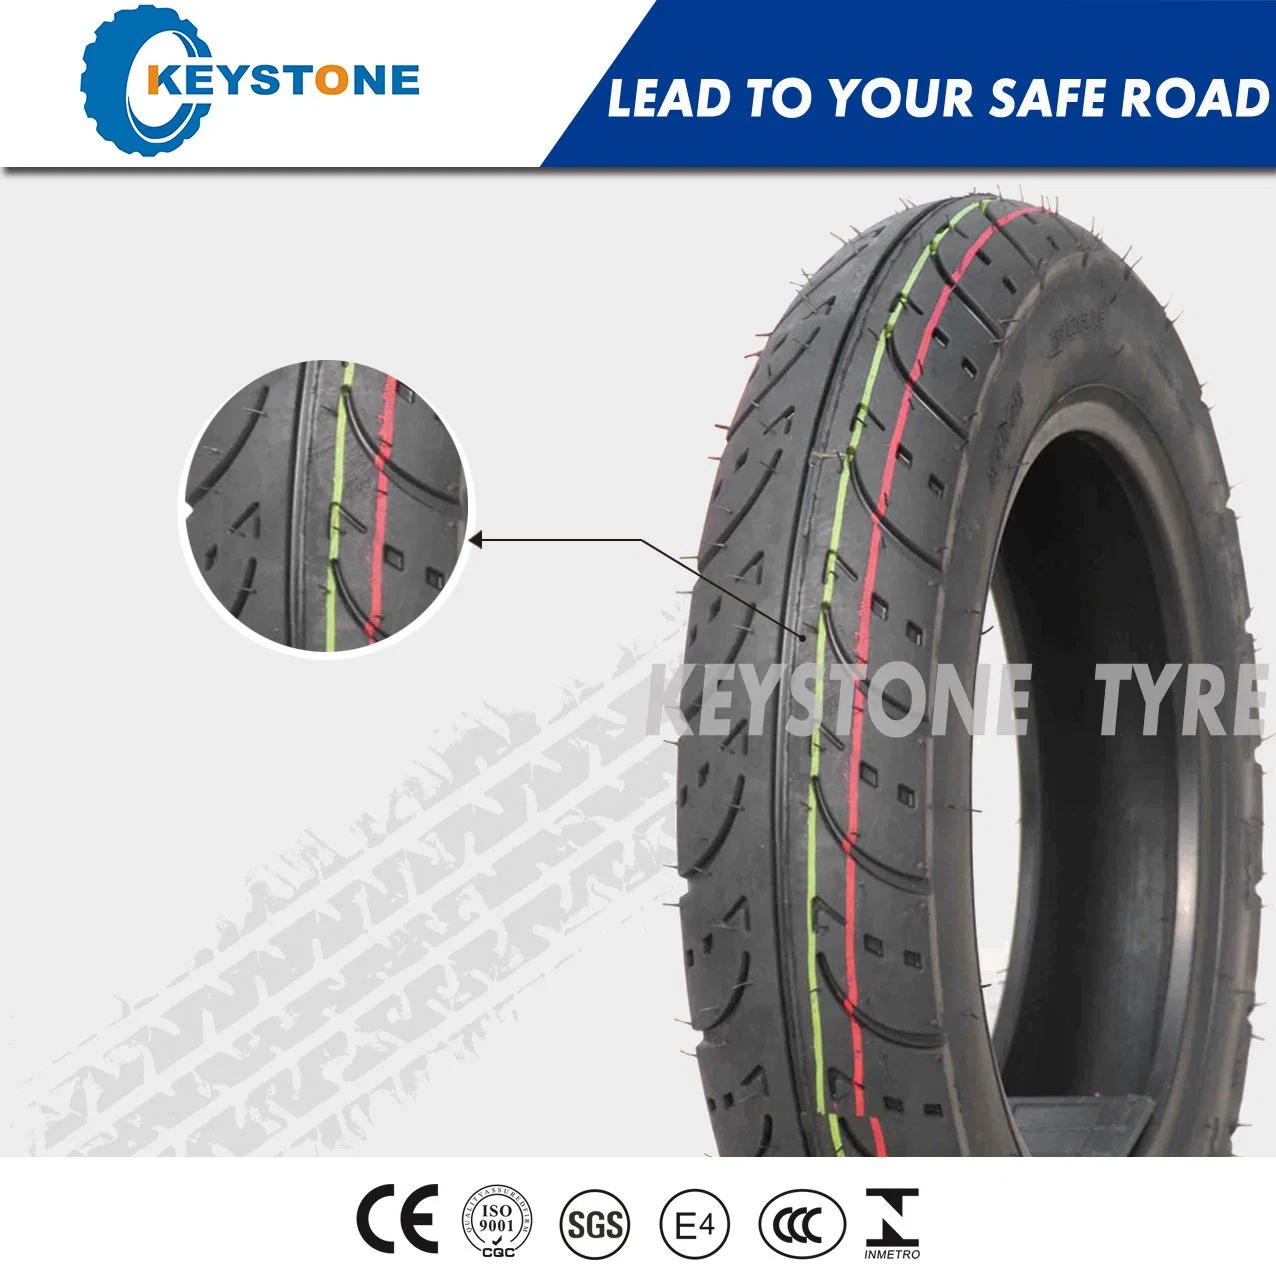 Made-in-China High-Quality Motorcycle Tires, Tubeless Tyre 130/70-12, 130/60-13